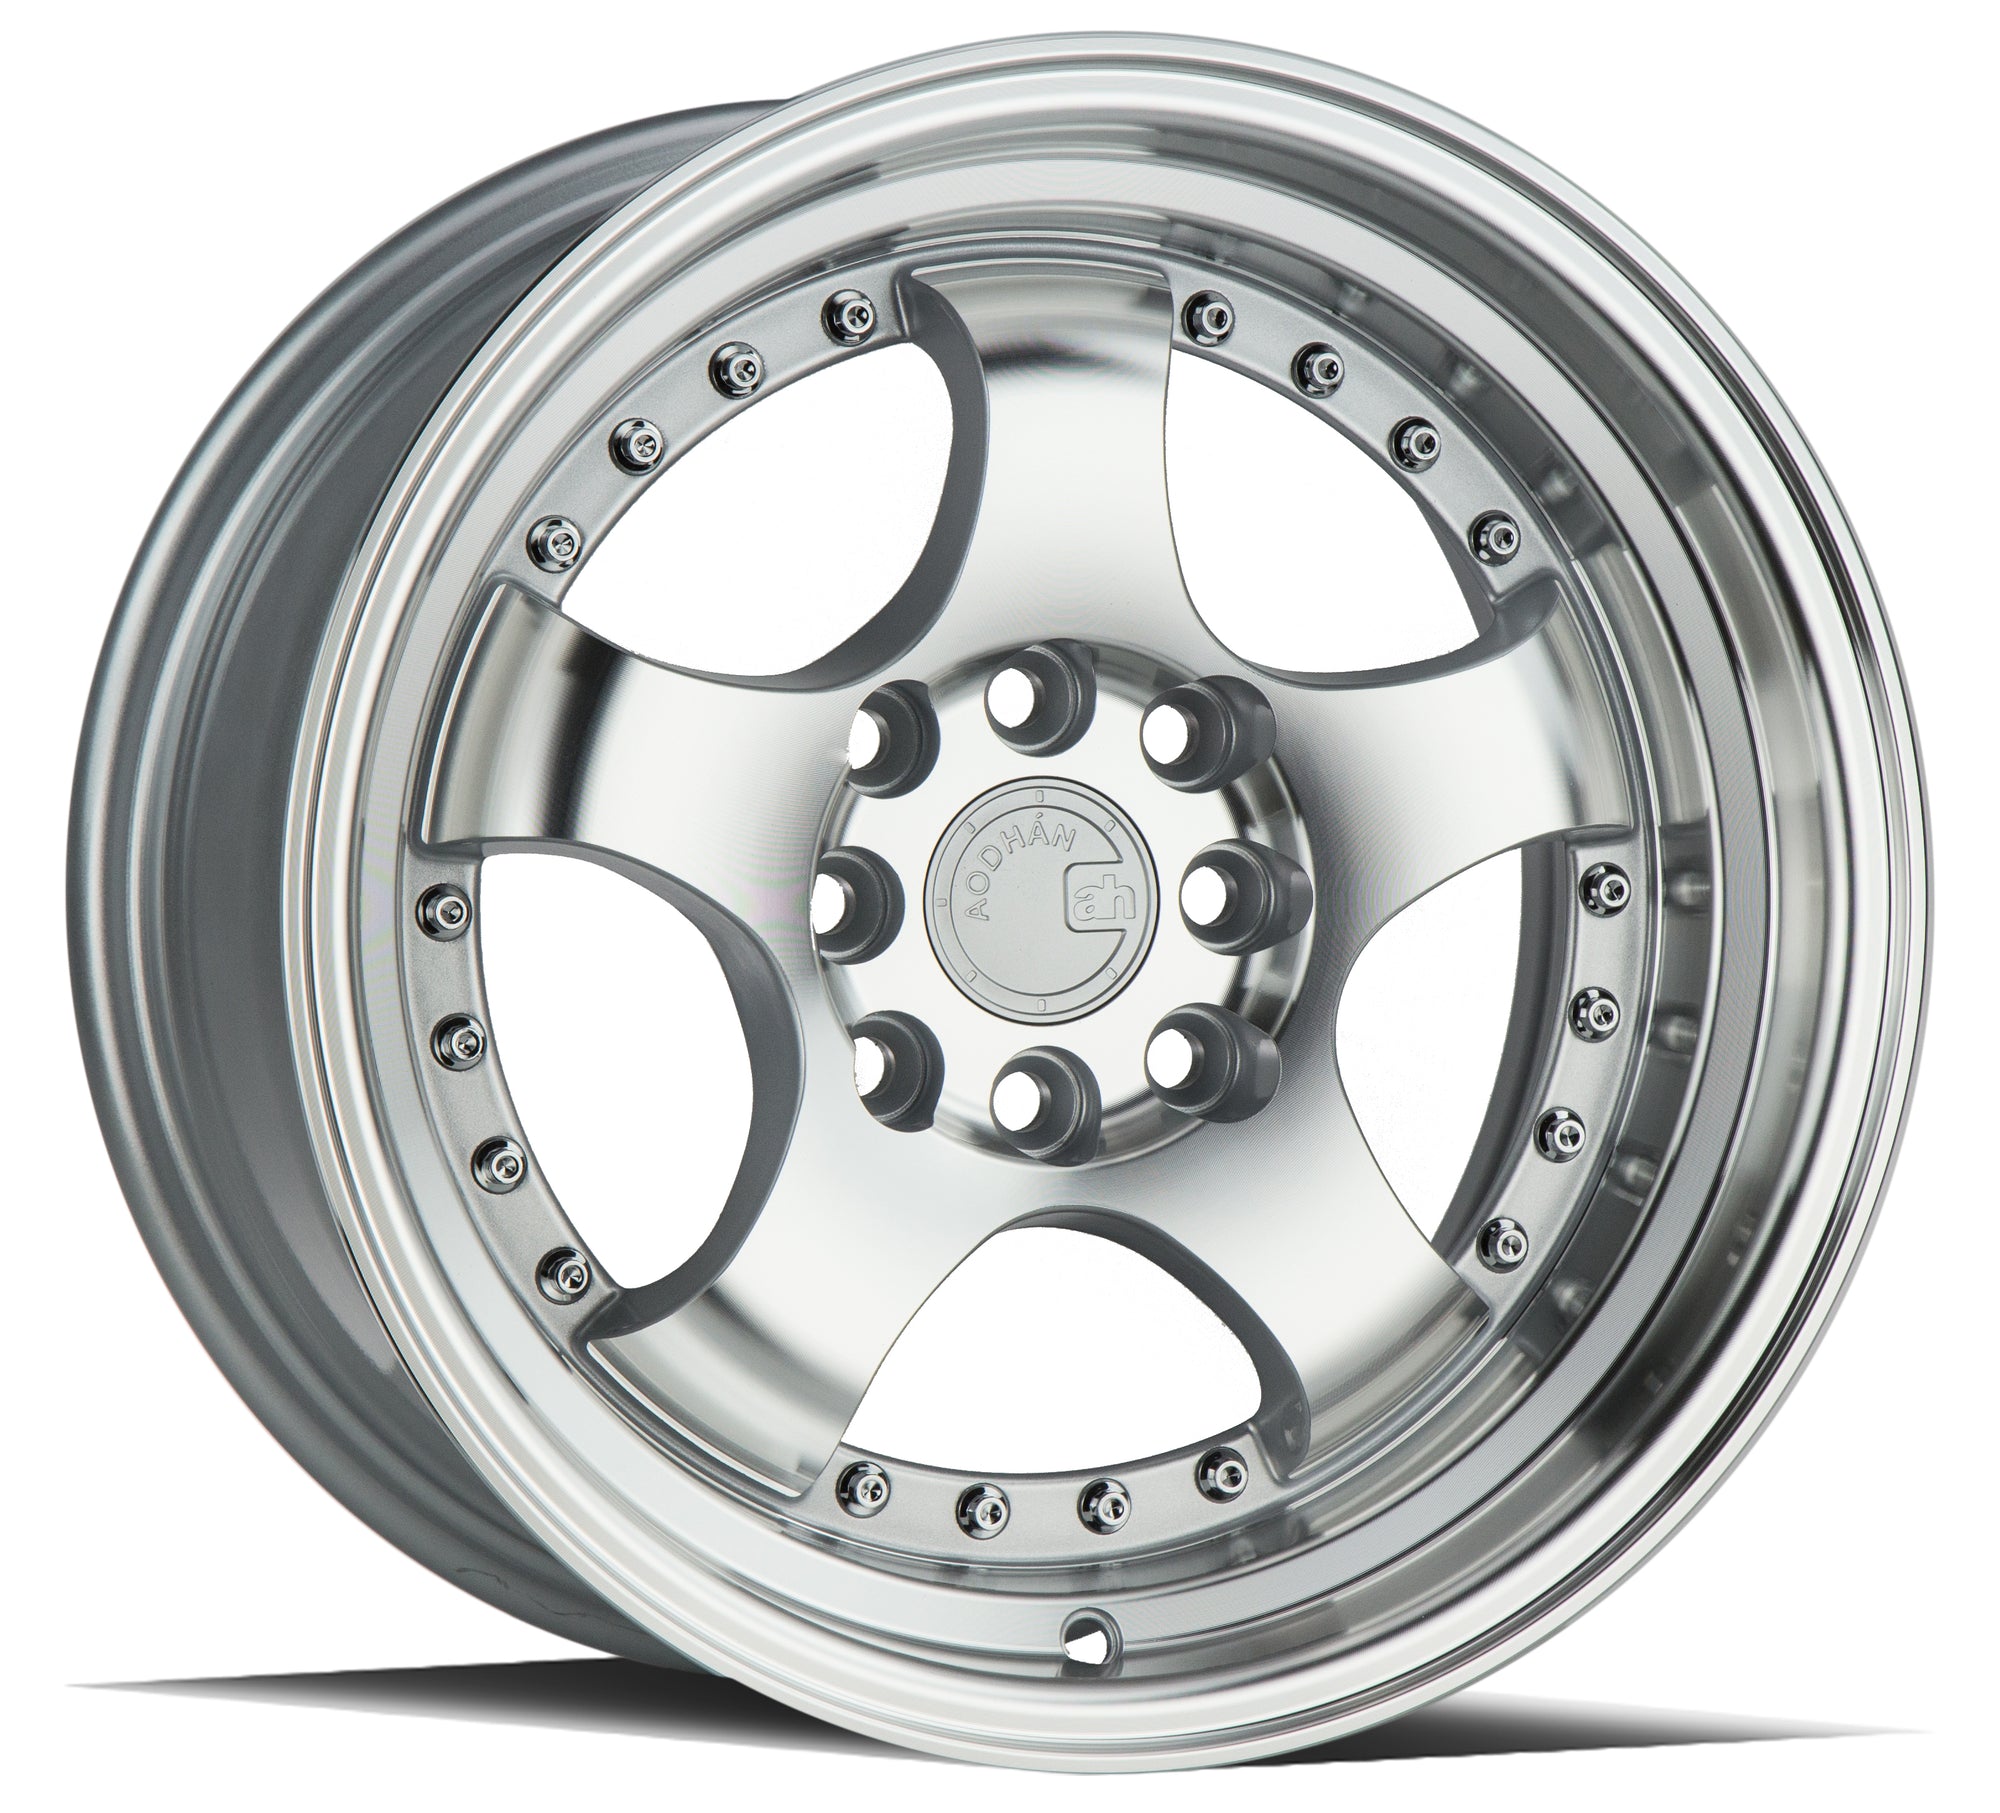 Aodhan AH03 15x8 4x100/114.3 +20 Silver Machined Face And Lip